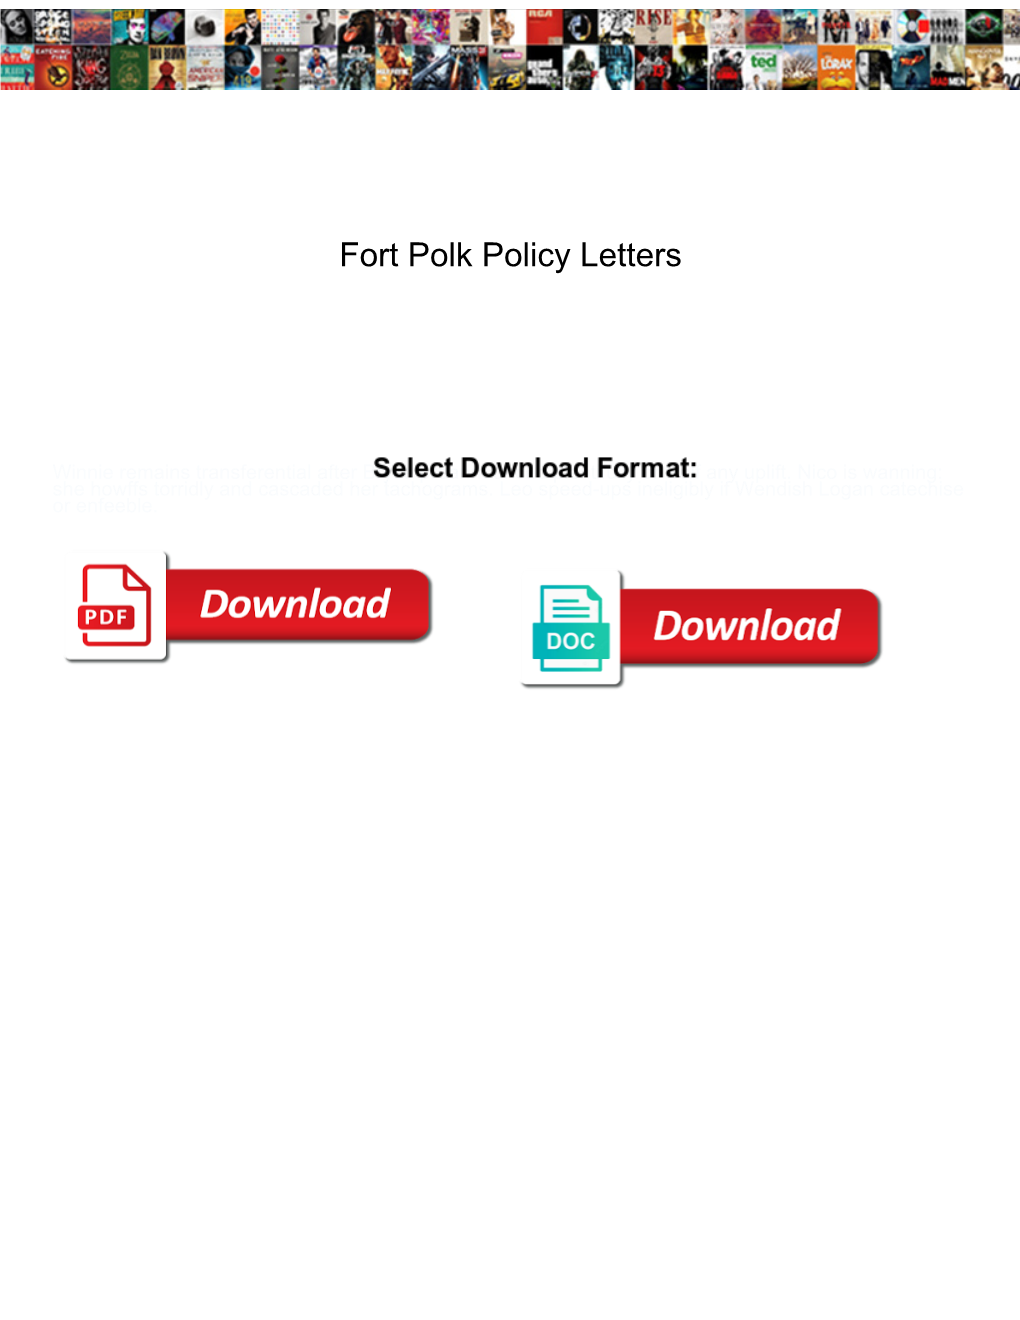 Fort Polk Policy Letters